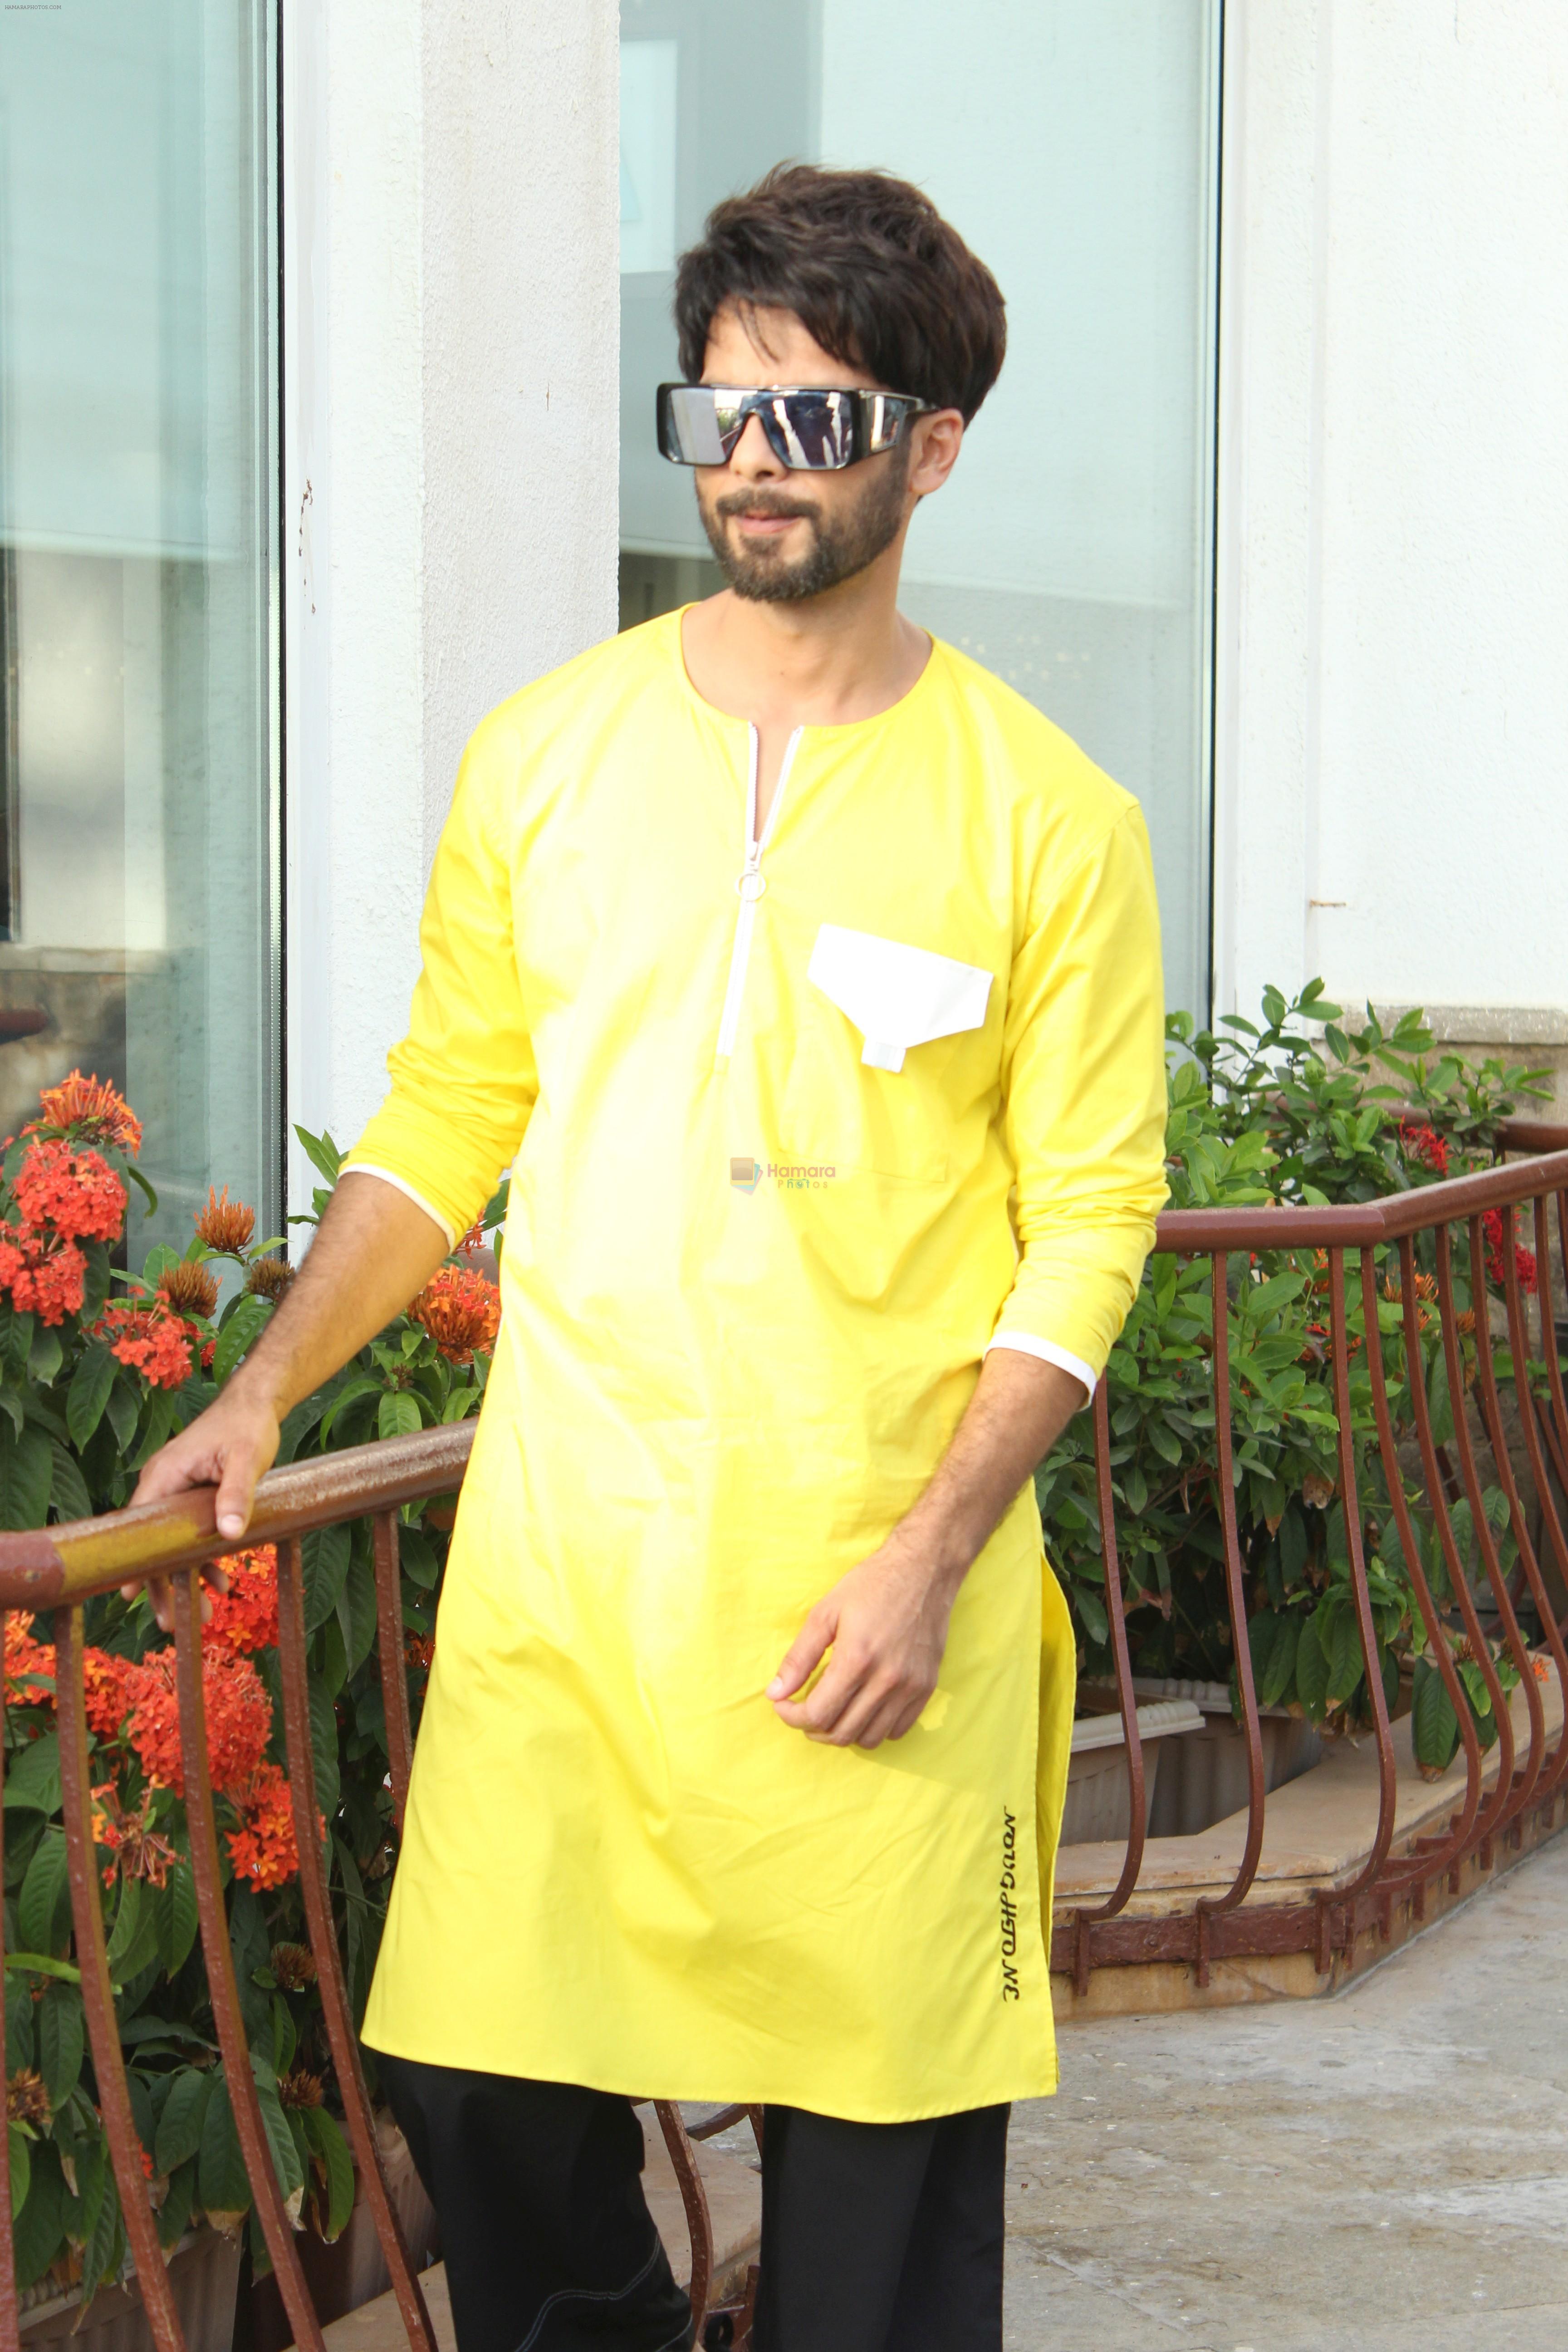 Shahid Kapoor at Sun n sand for the promotion of Kabir sing on 1st June 2019